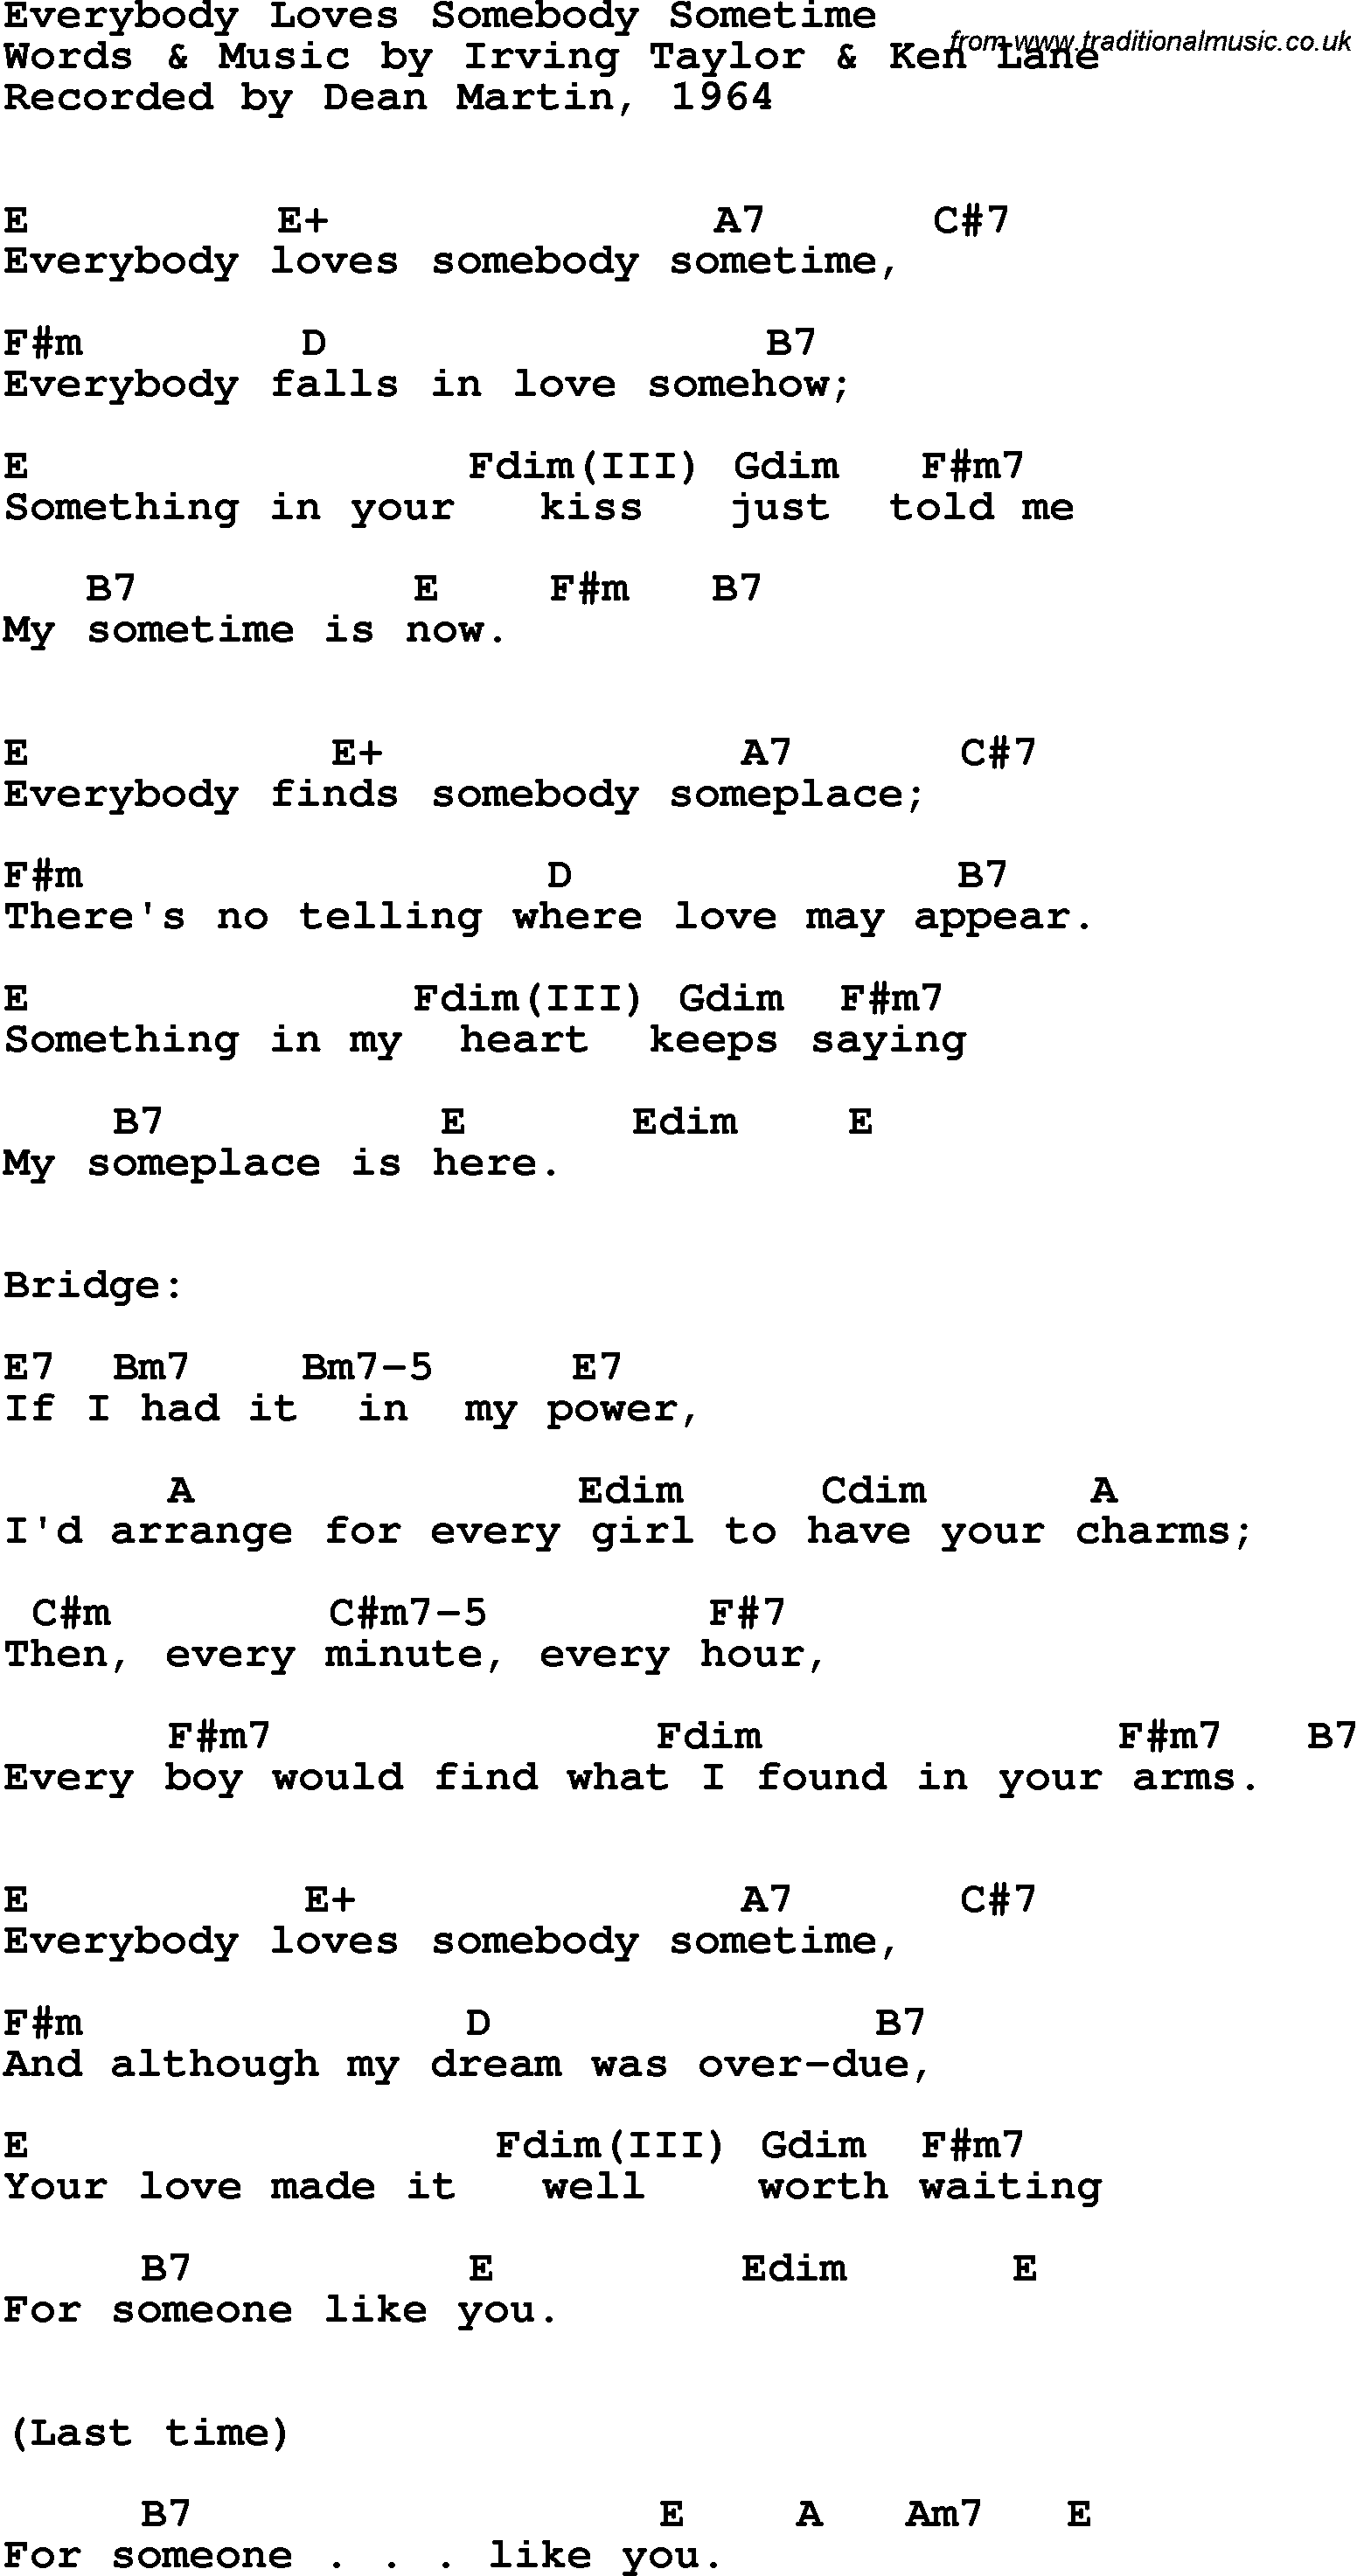 Song Lyrics with guitar chords for Everybody Loves Somebody Sometime - Dean Martin, 1964